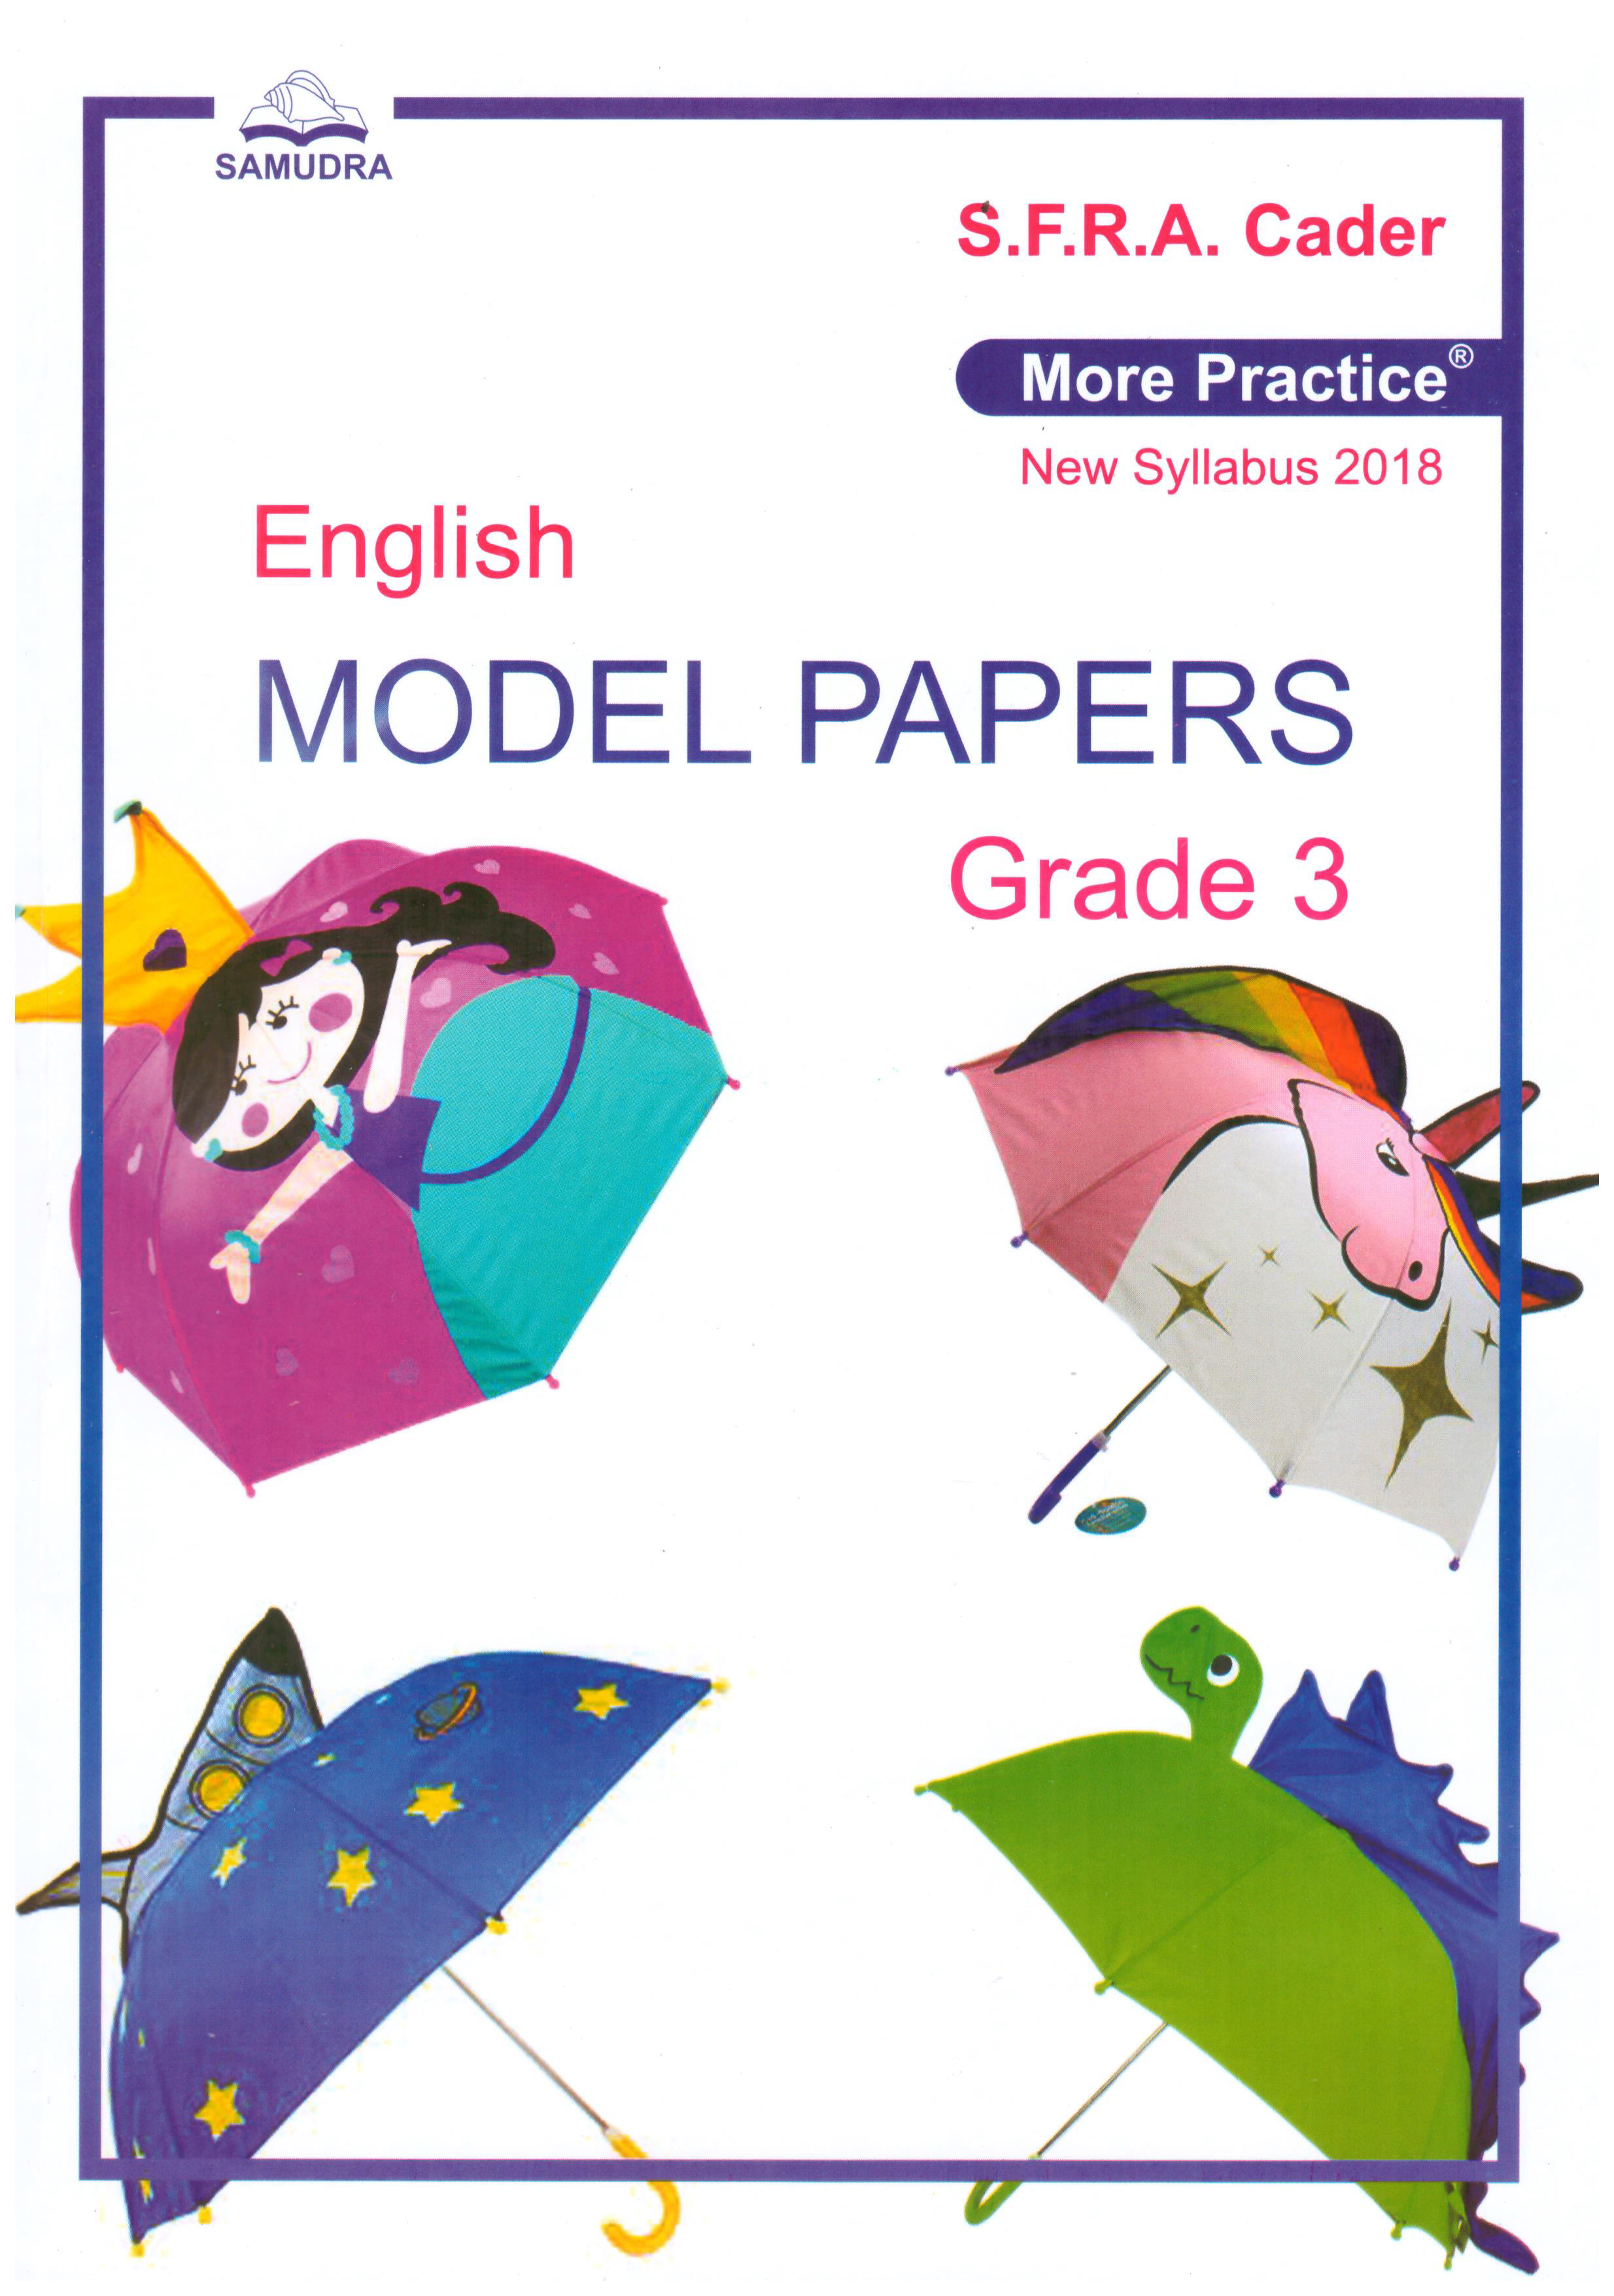 More Practice English Model Papers Grade 3 (New Syllabus 2018)